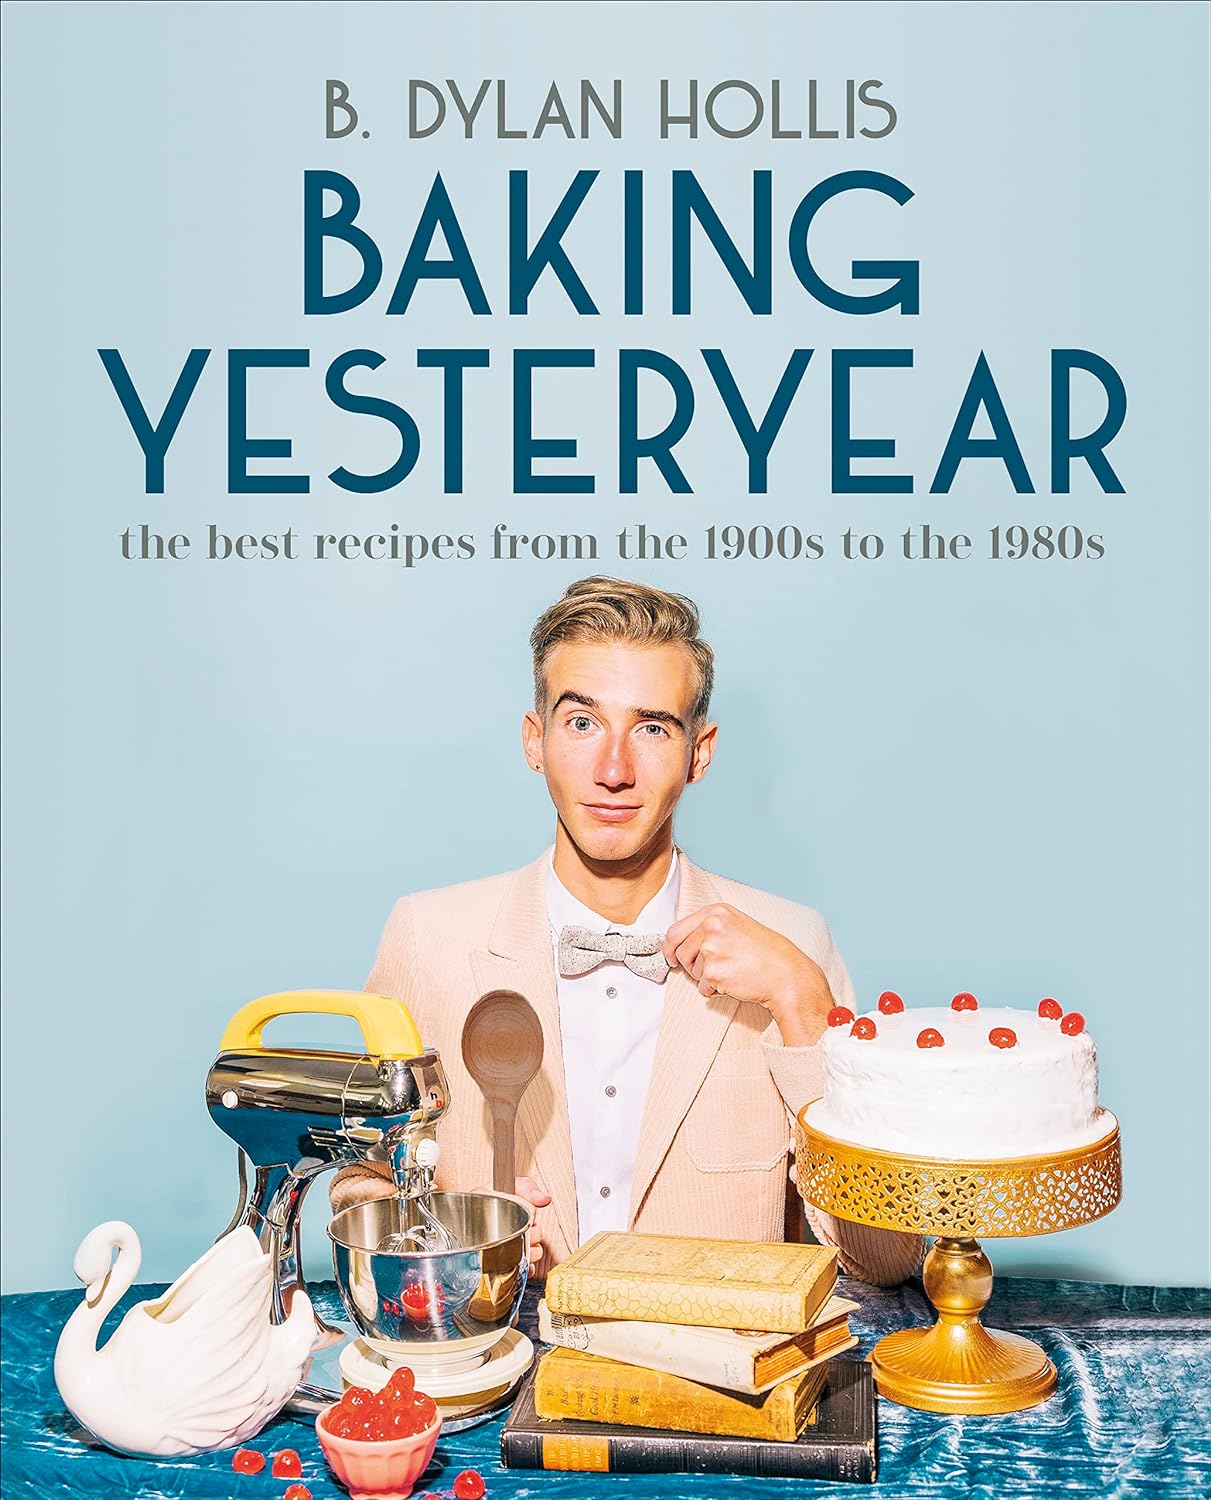 Cover of "Baking Yesteryear" by B. Dylan Hollis